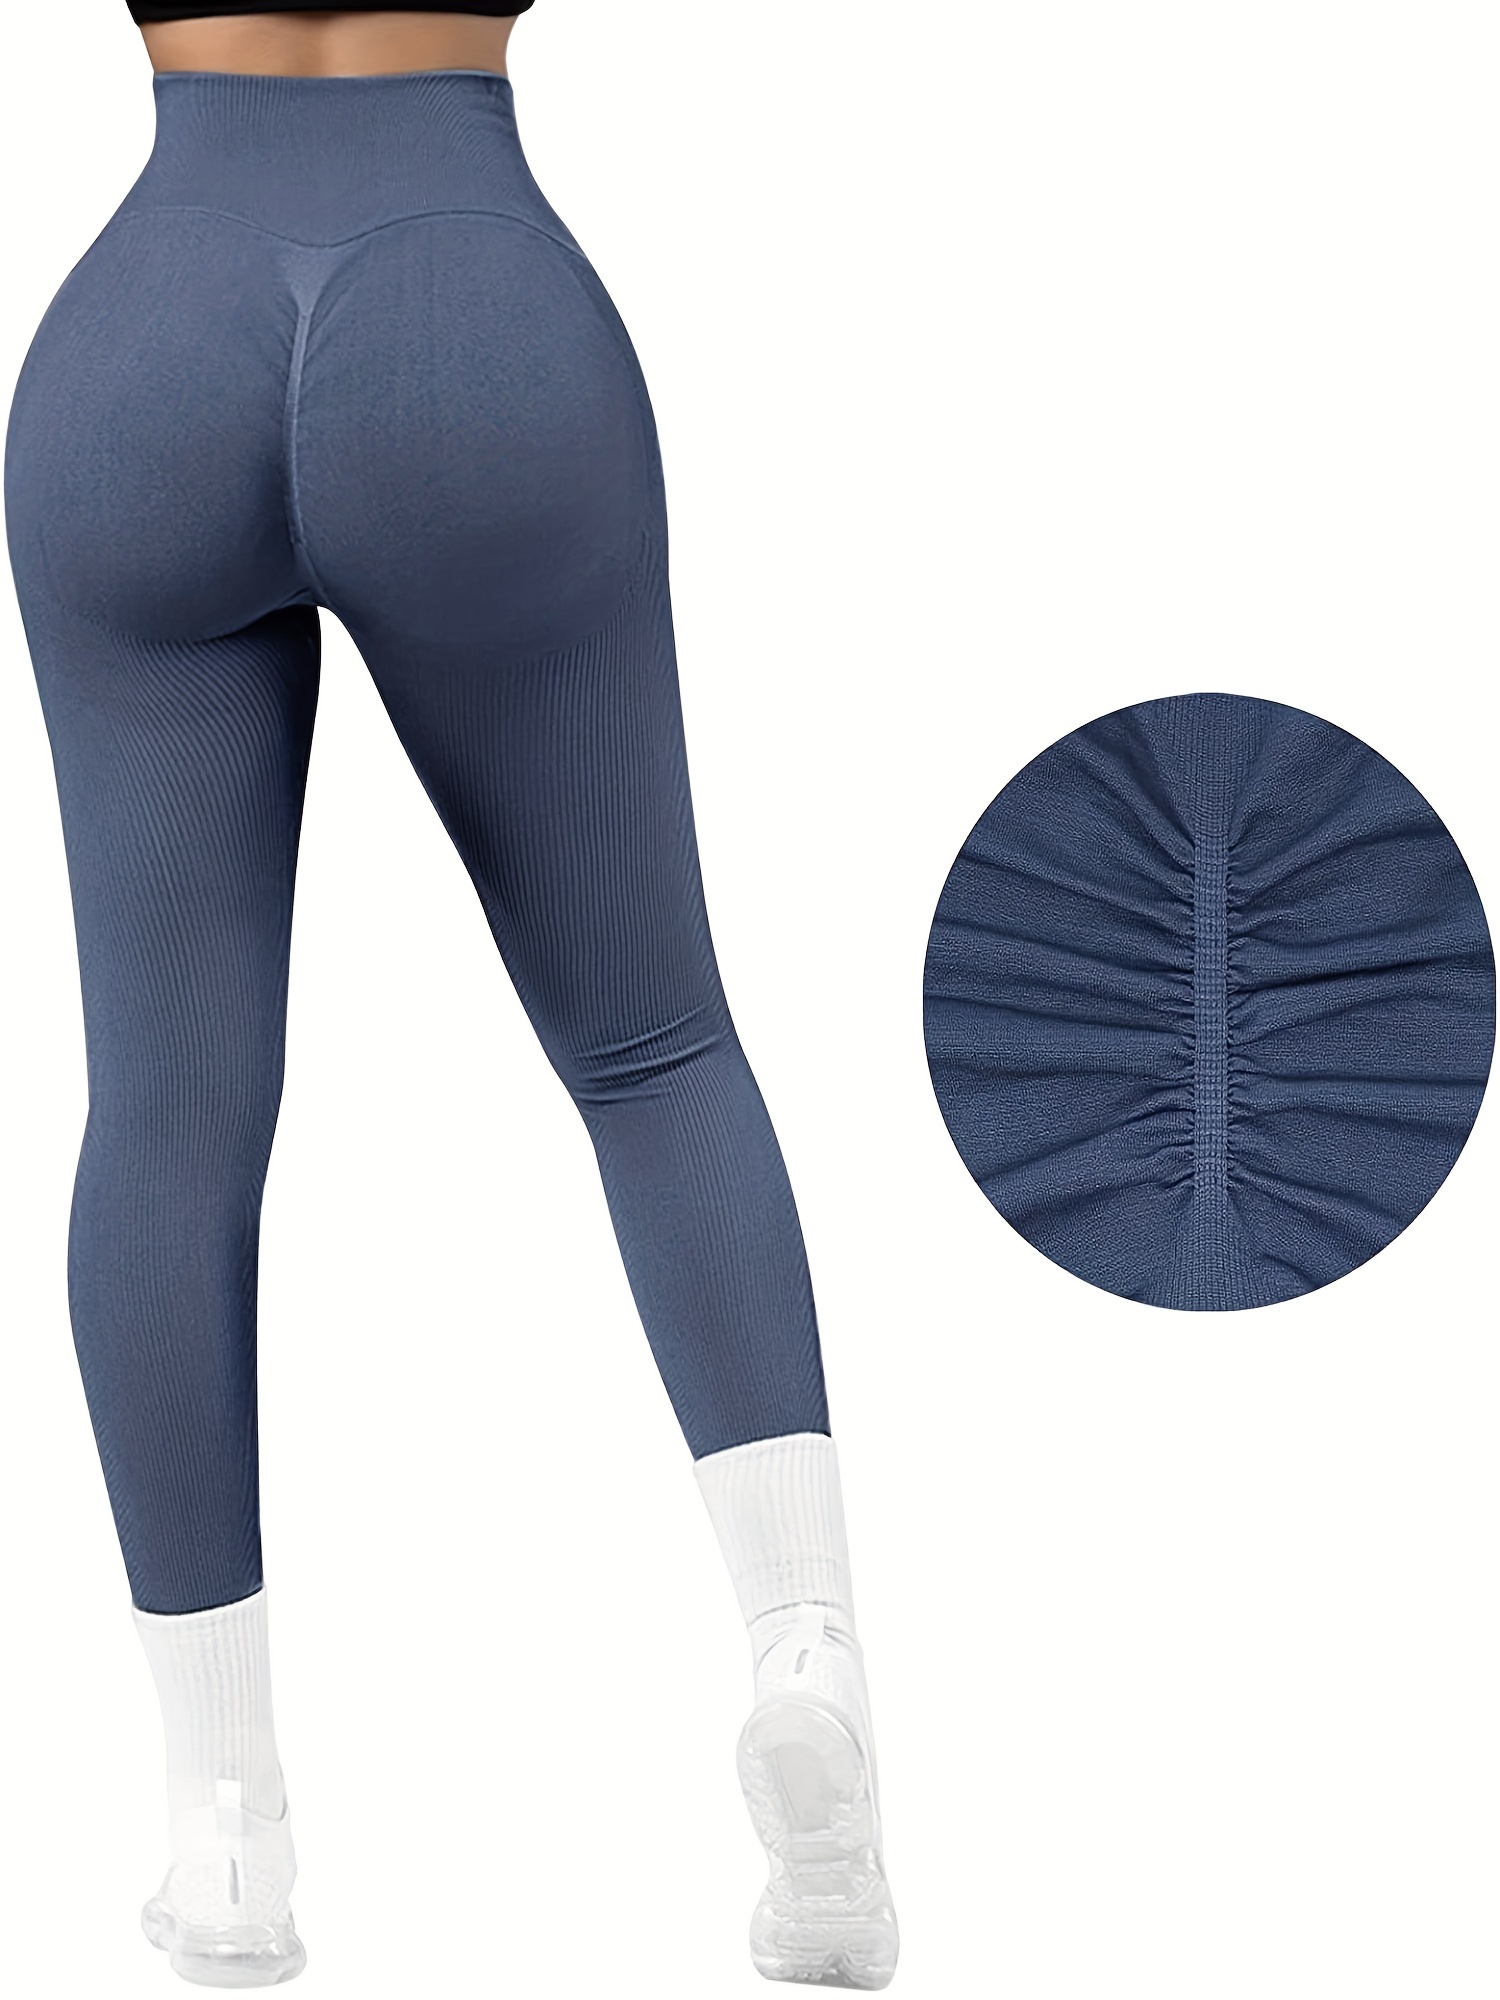 Leggings with Pockets for Women High Waisted Tummy Control Yoga Pants 4  Ways Stretch Butt Lifting Workout Leggings